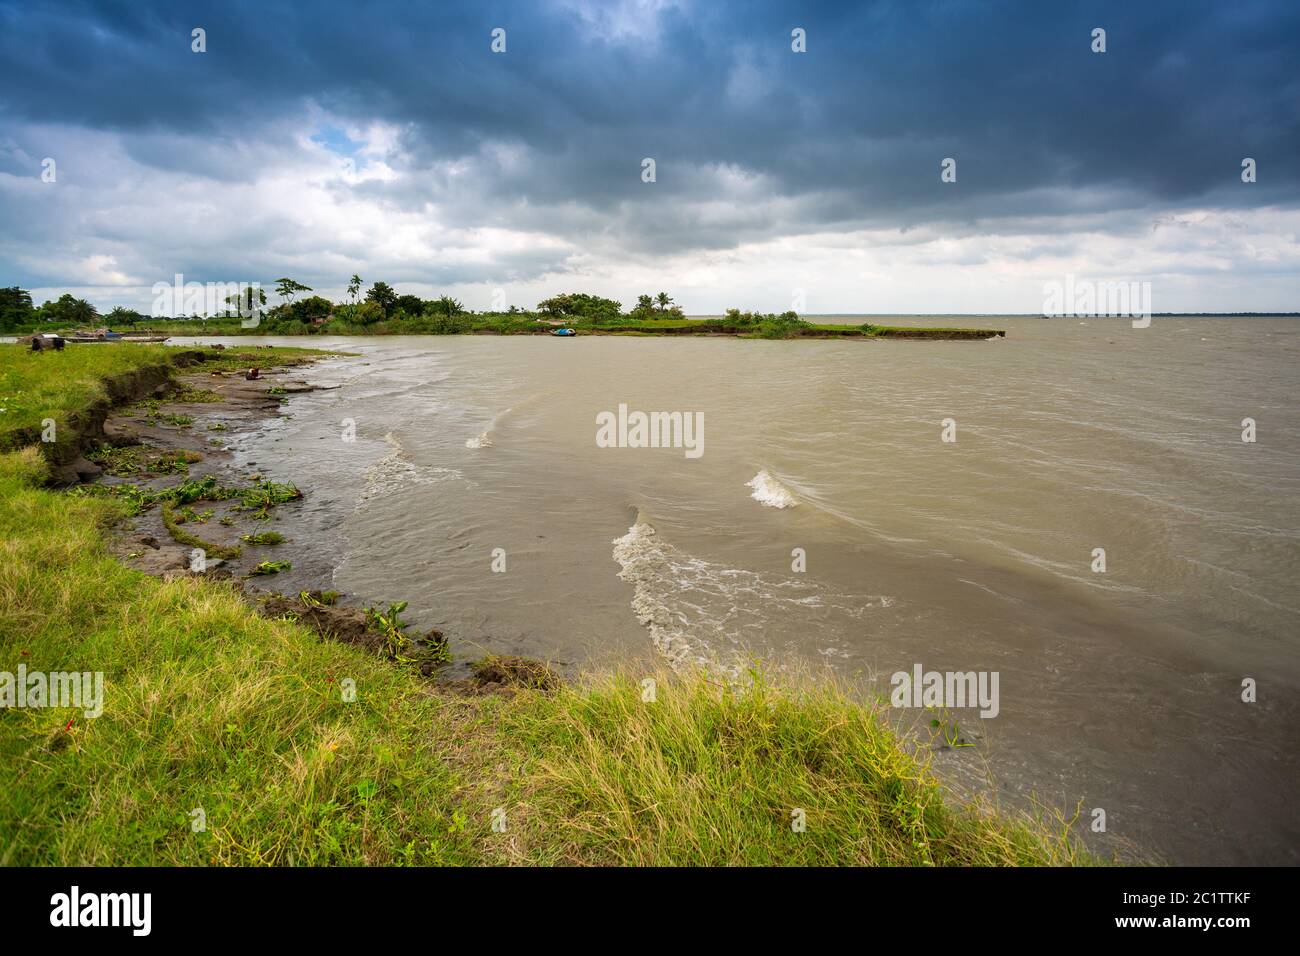 Dark stormy rain clouds looming by a river. Stock Photo